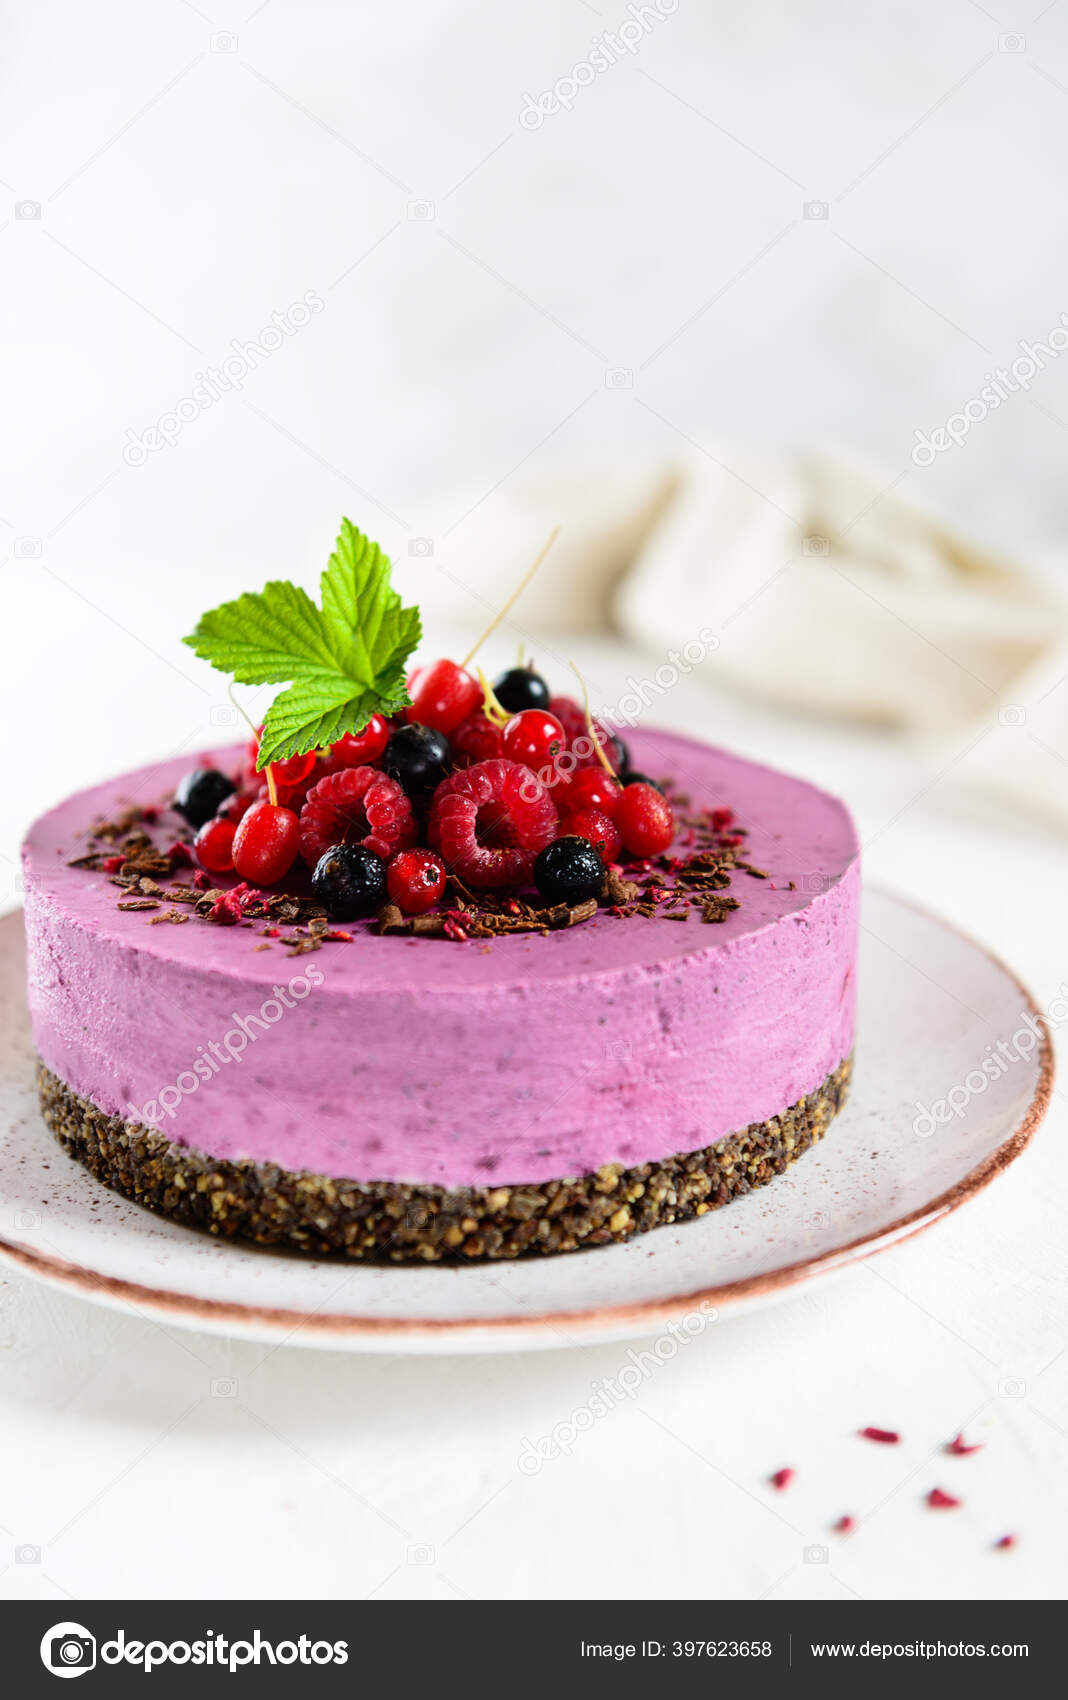 Purple Passion Black currant Cake Delivery in Trichy, Order Cake Online  Trichy, Cake Home Delivery, Send Cake as Gift by Cake World Online, Online  Shopping India